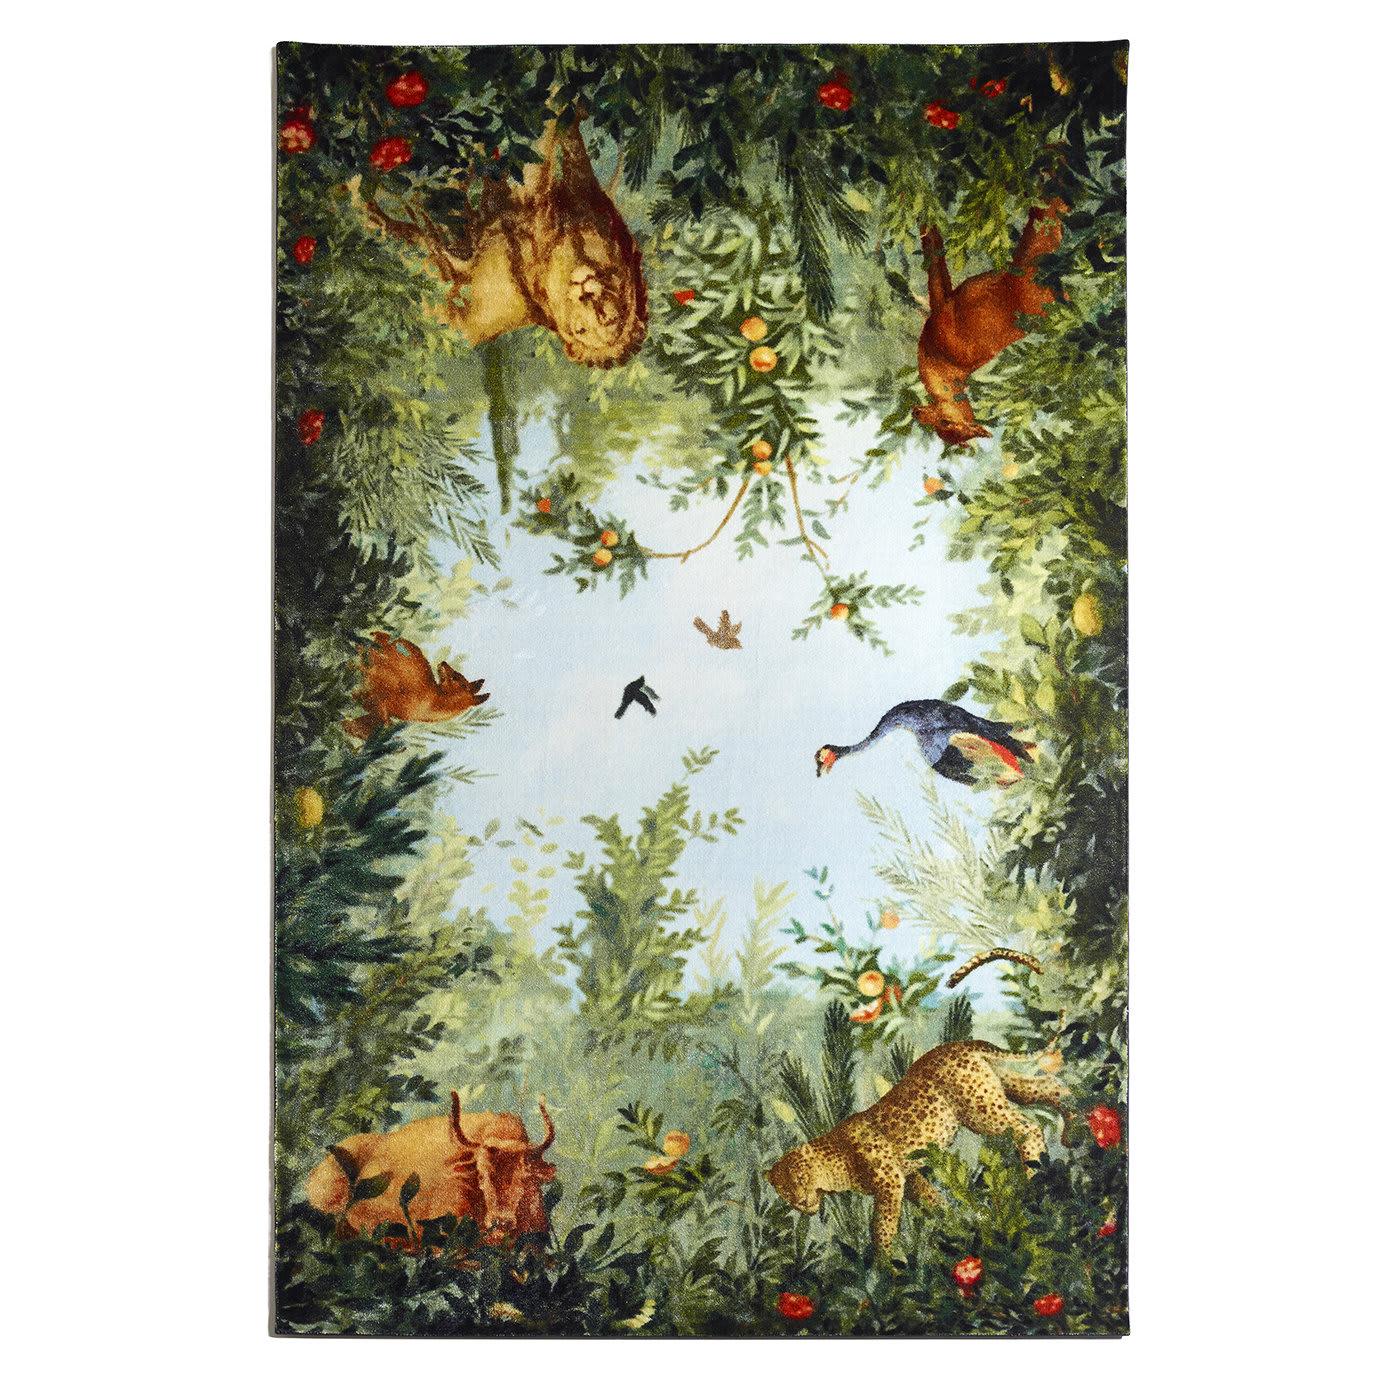 As a window to our world, this rug is a reinterpretation of the frescoes of the seventeenth century and showcase beautiful animals roaming through the jungle. The rugs are available in two sizes.